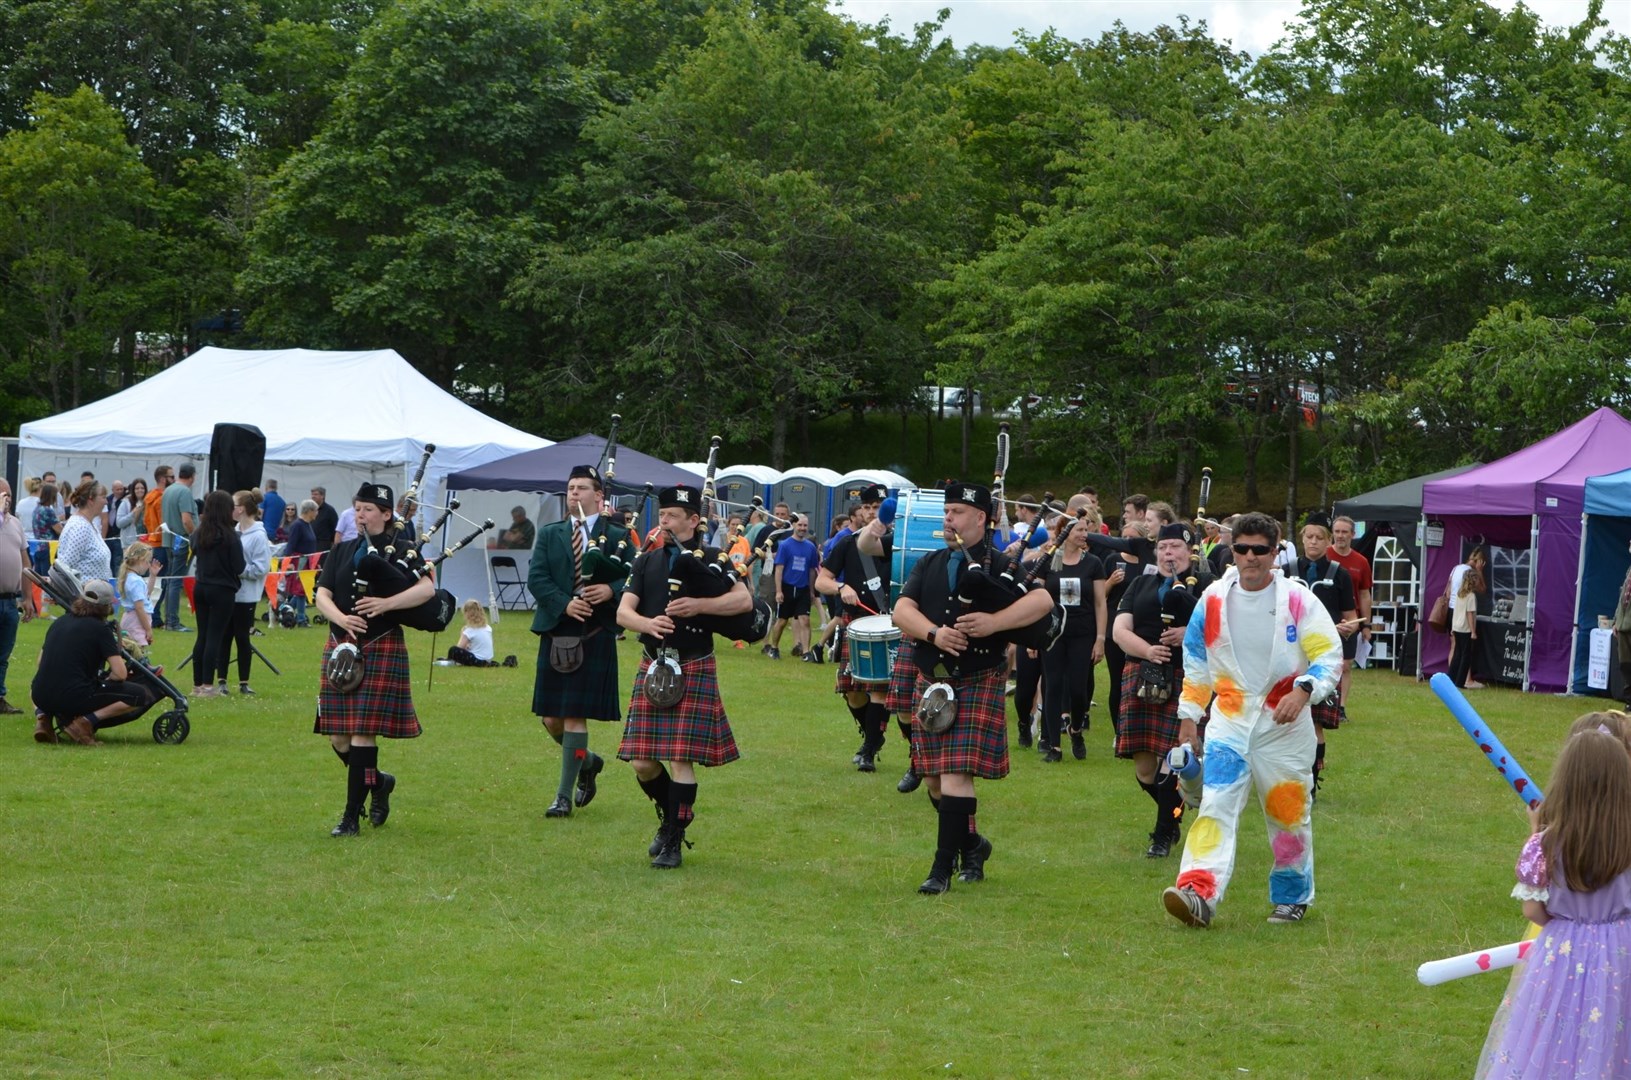 The Sutherland Caledonian Pipe Band take to the field.